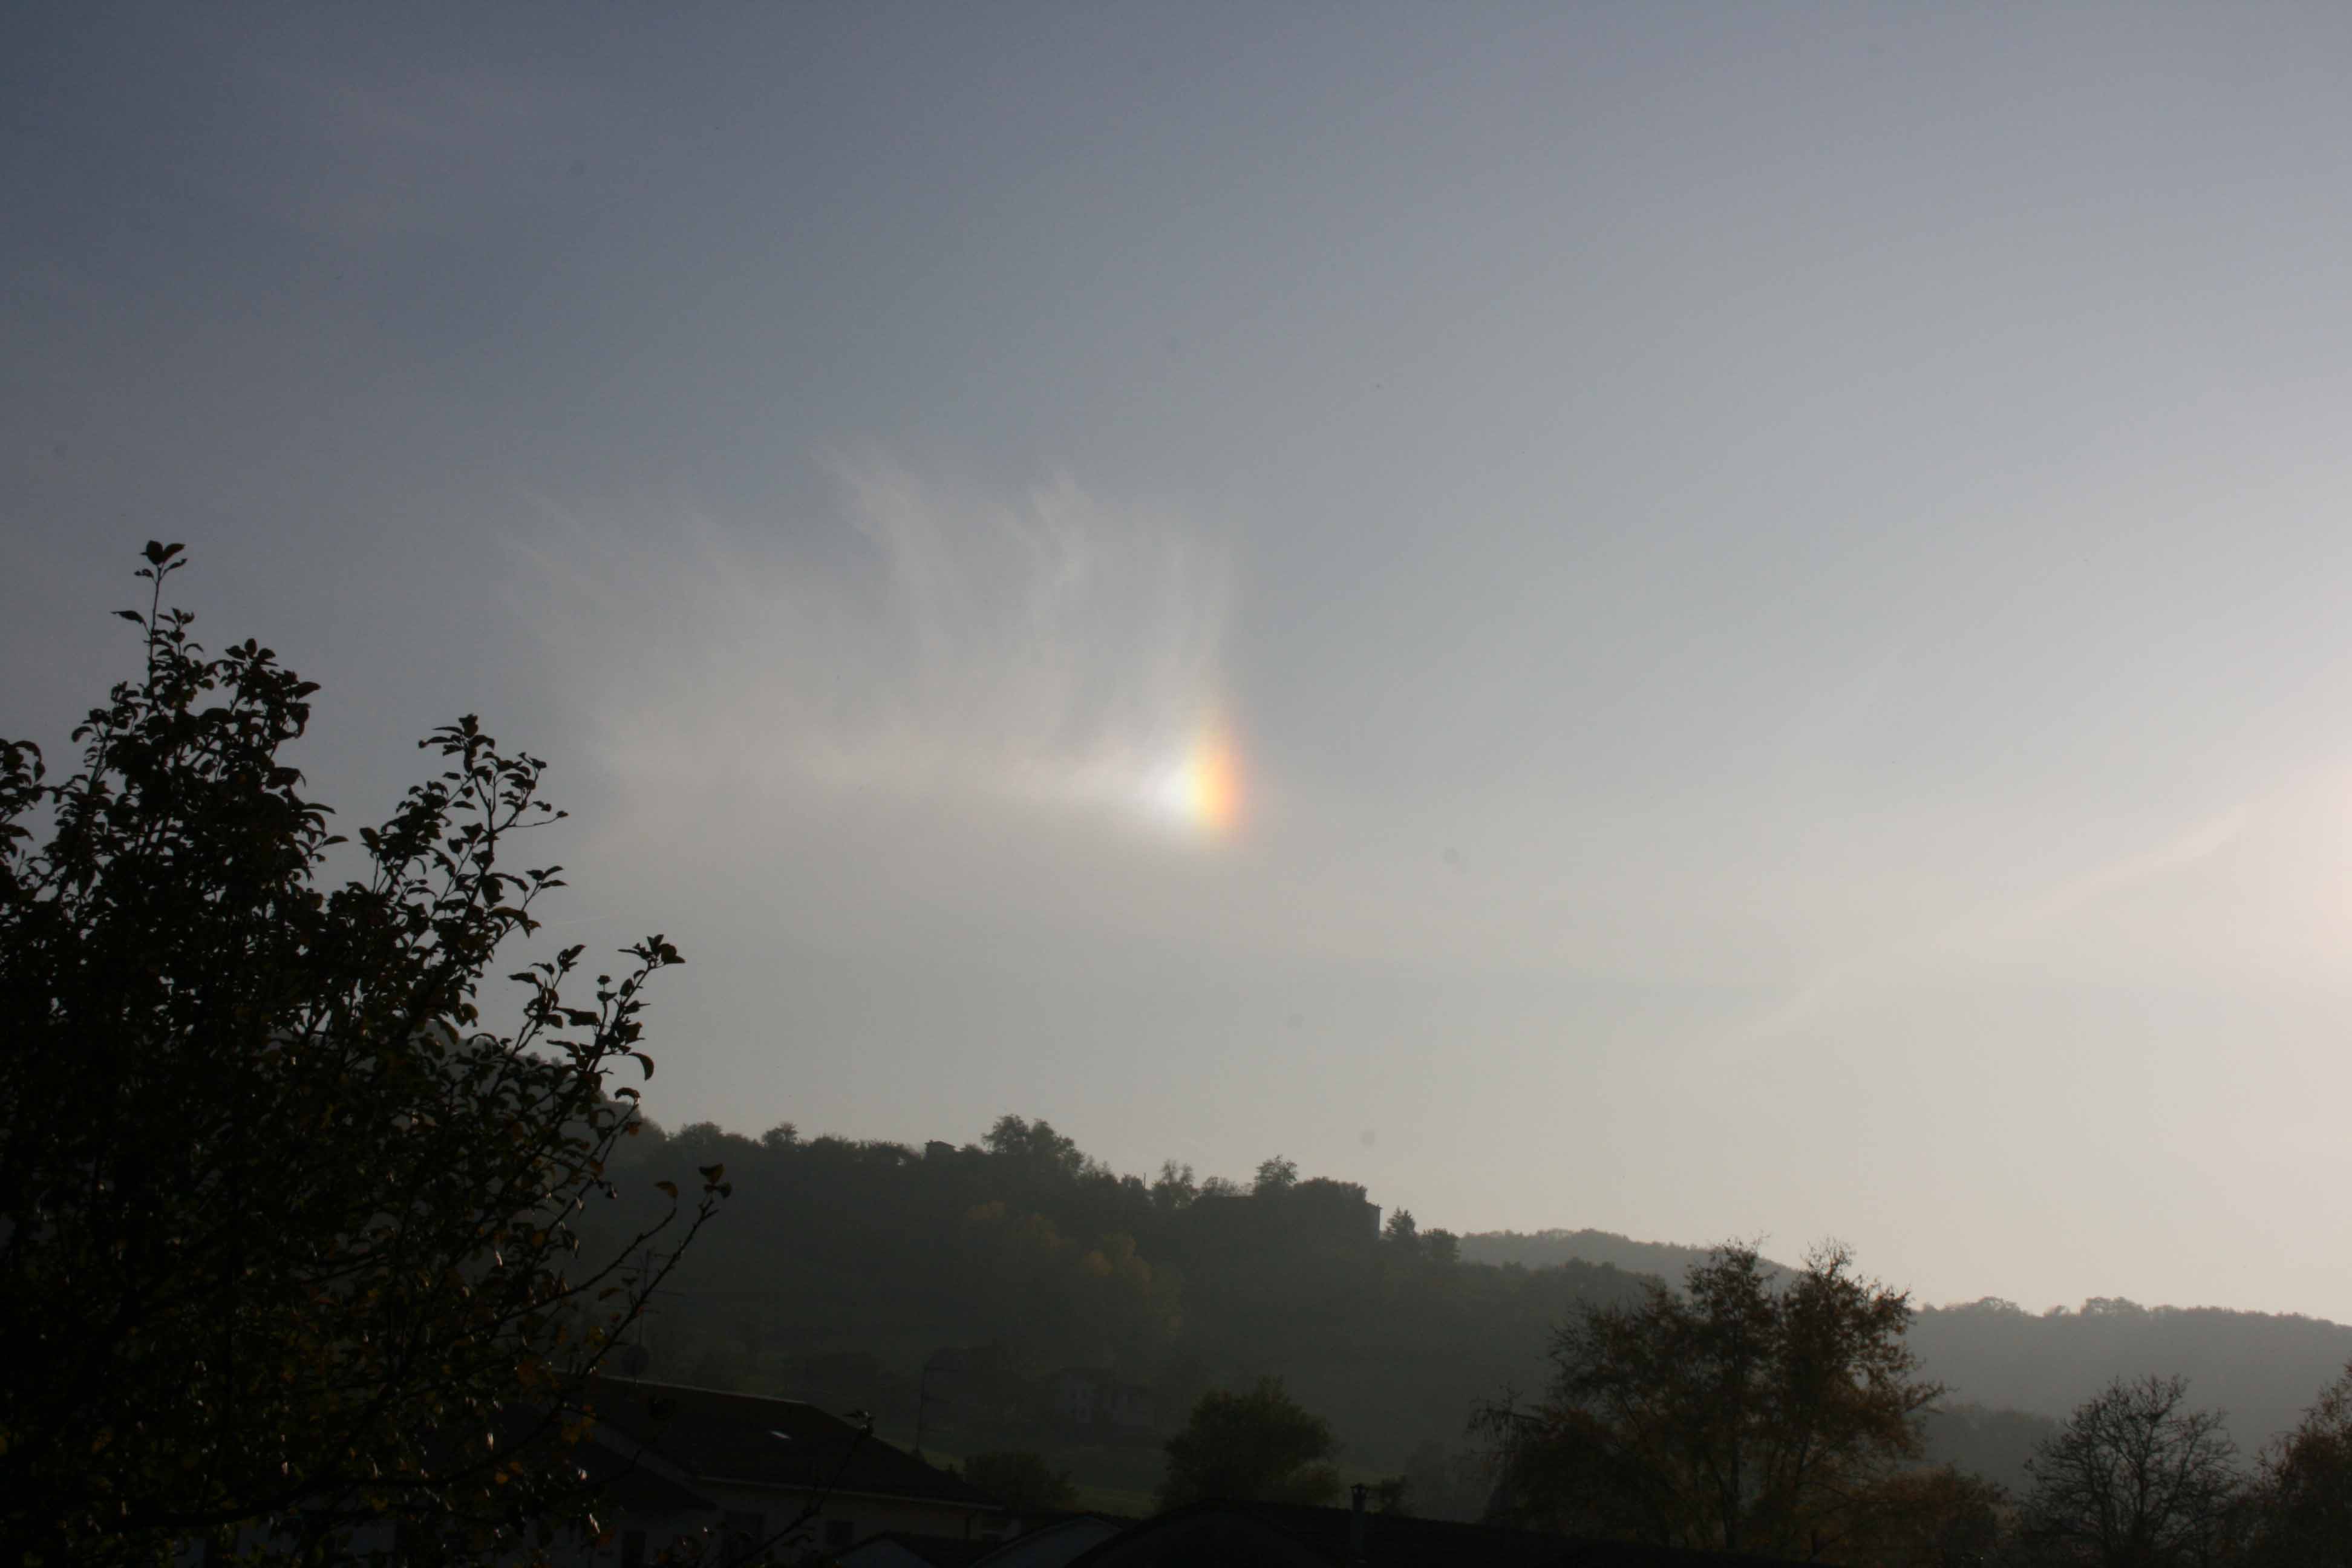 Parhelion/sundog from Pieve di Cusignano-136 KB; Click on the image to enlarge